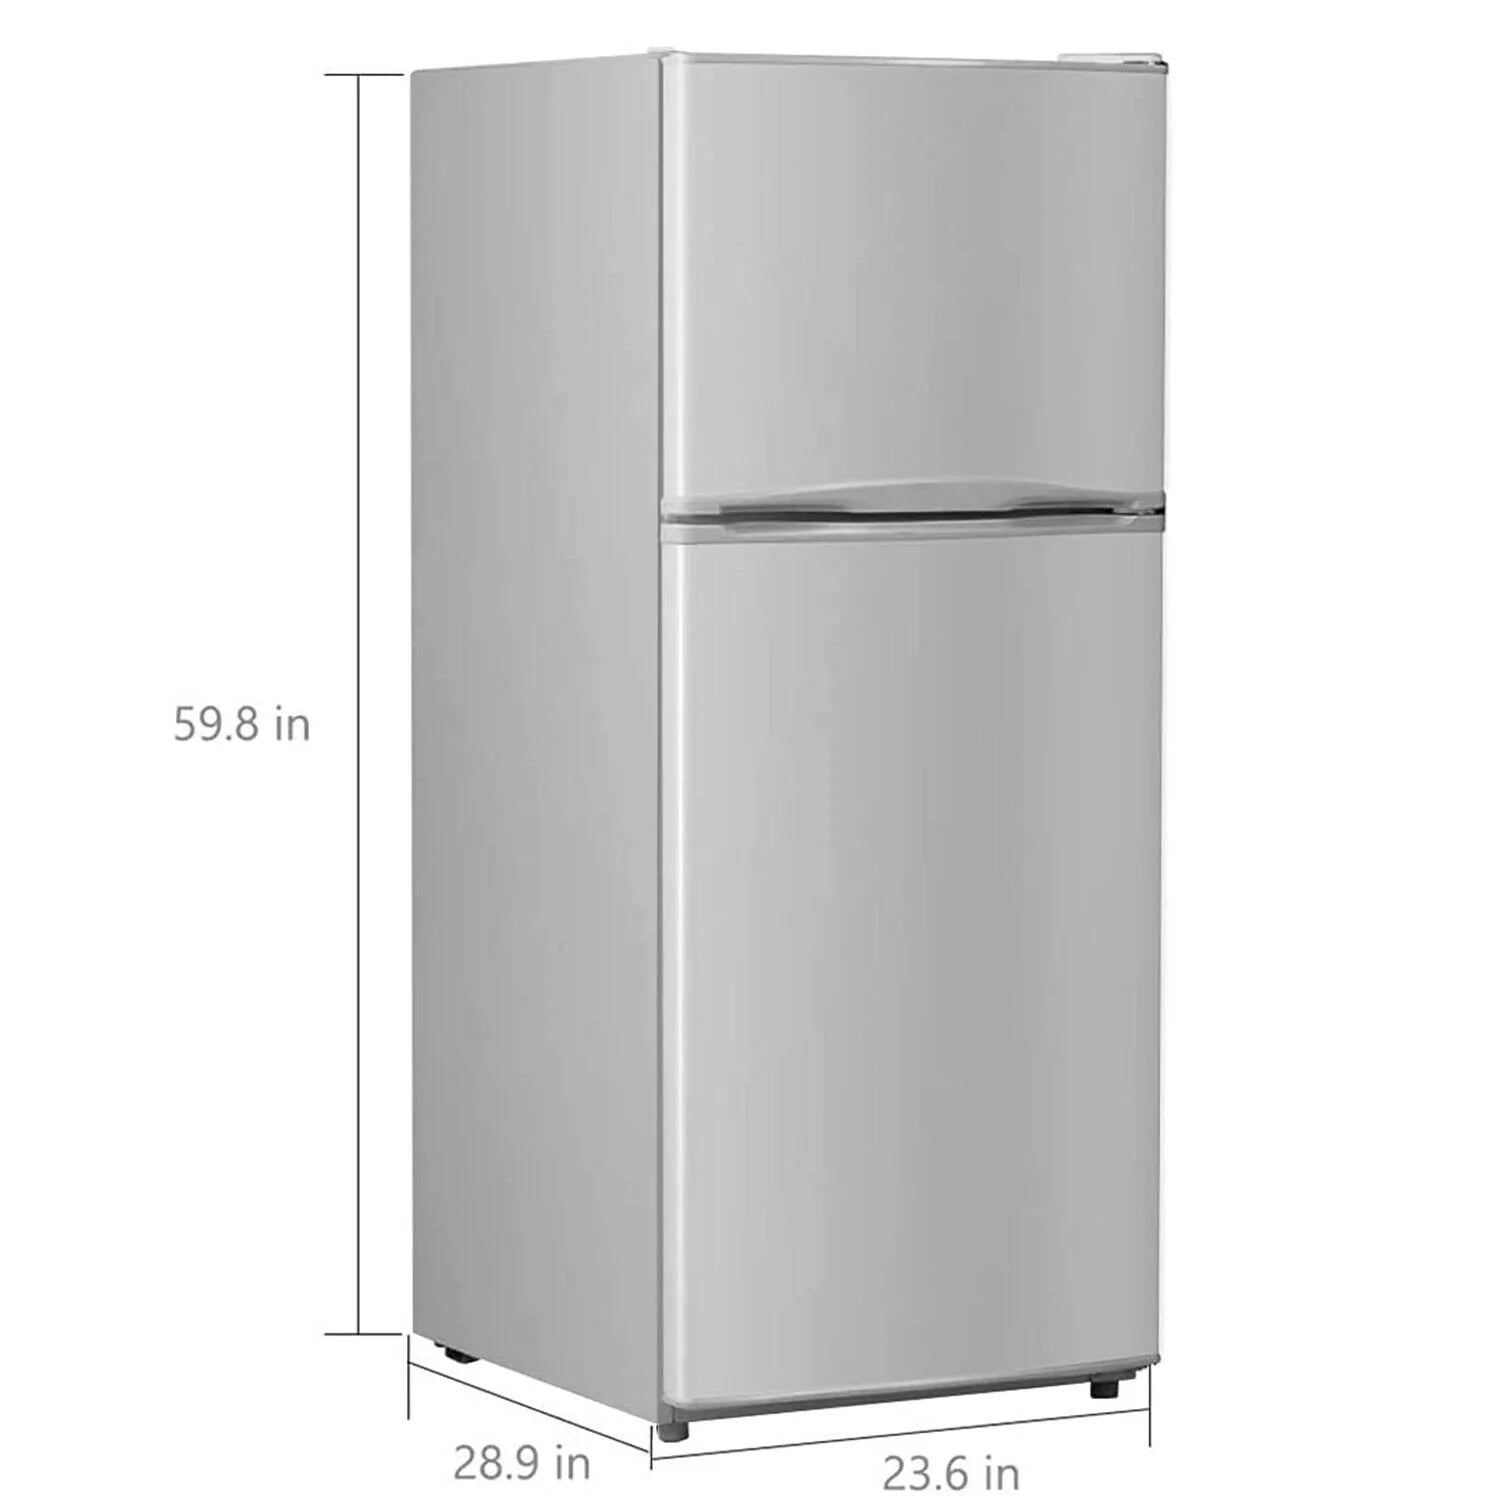 SMAD 12 cu.ft Top-Freezer Reversible Door Refrigerator Color Stainless Steel/Silver - dimensions view